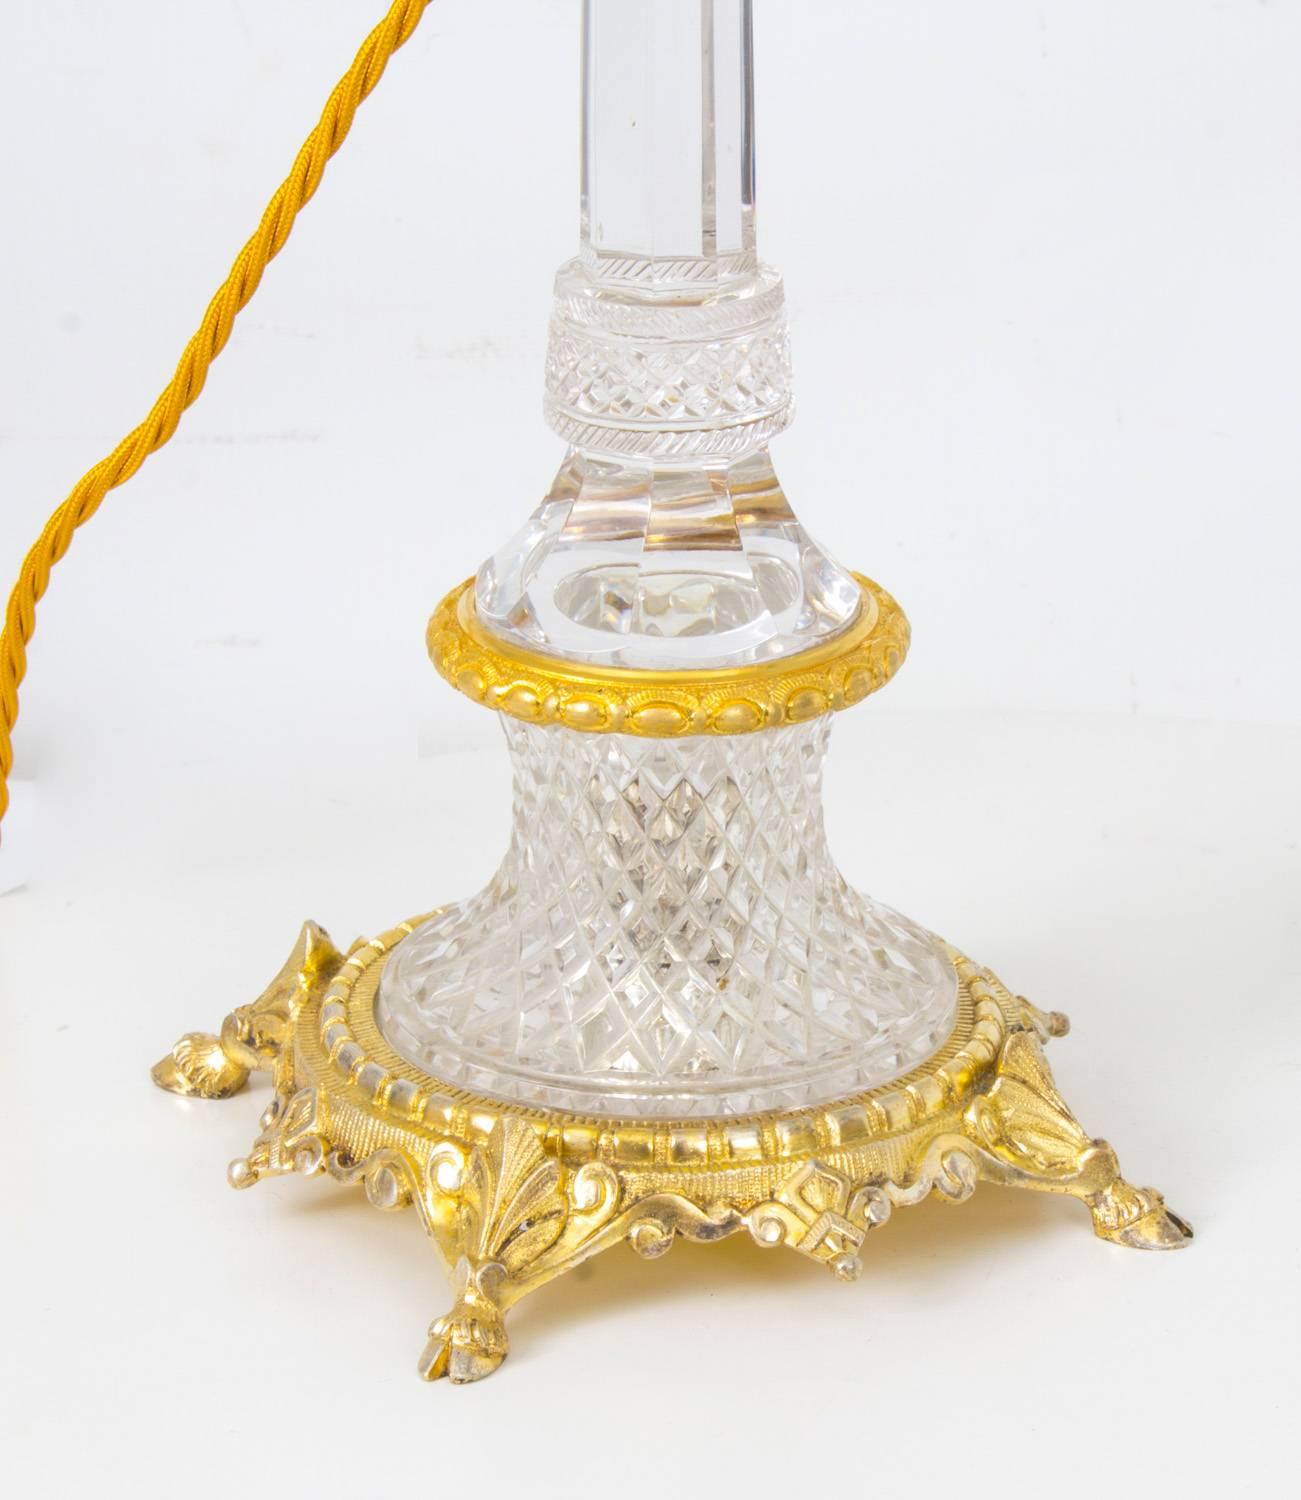 This is a truly superb antique ormolu and crystal Clarke's Cricklite table lamp, circa 1880 in date.

This Classic ormolu cut crystal lamp has been converted to electricity from a Clarke's Fairy light.

It features a fluted cut-glass stem on an